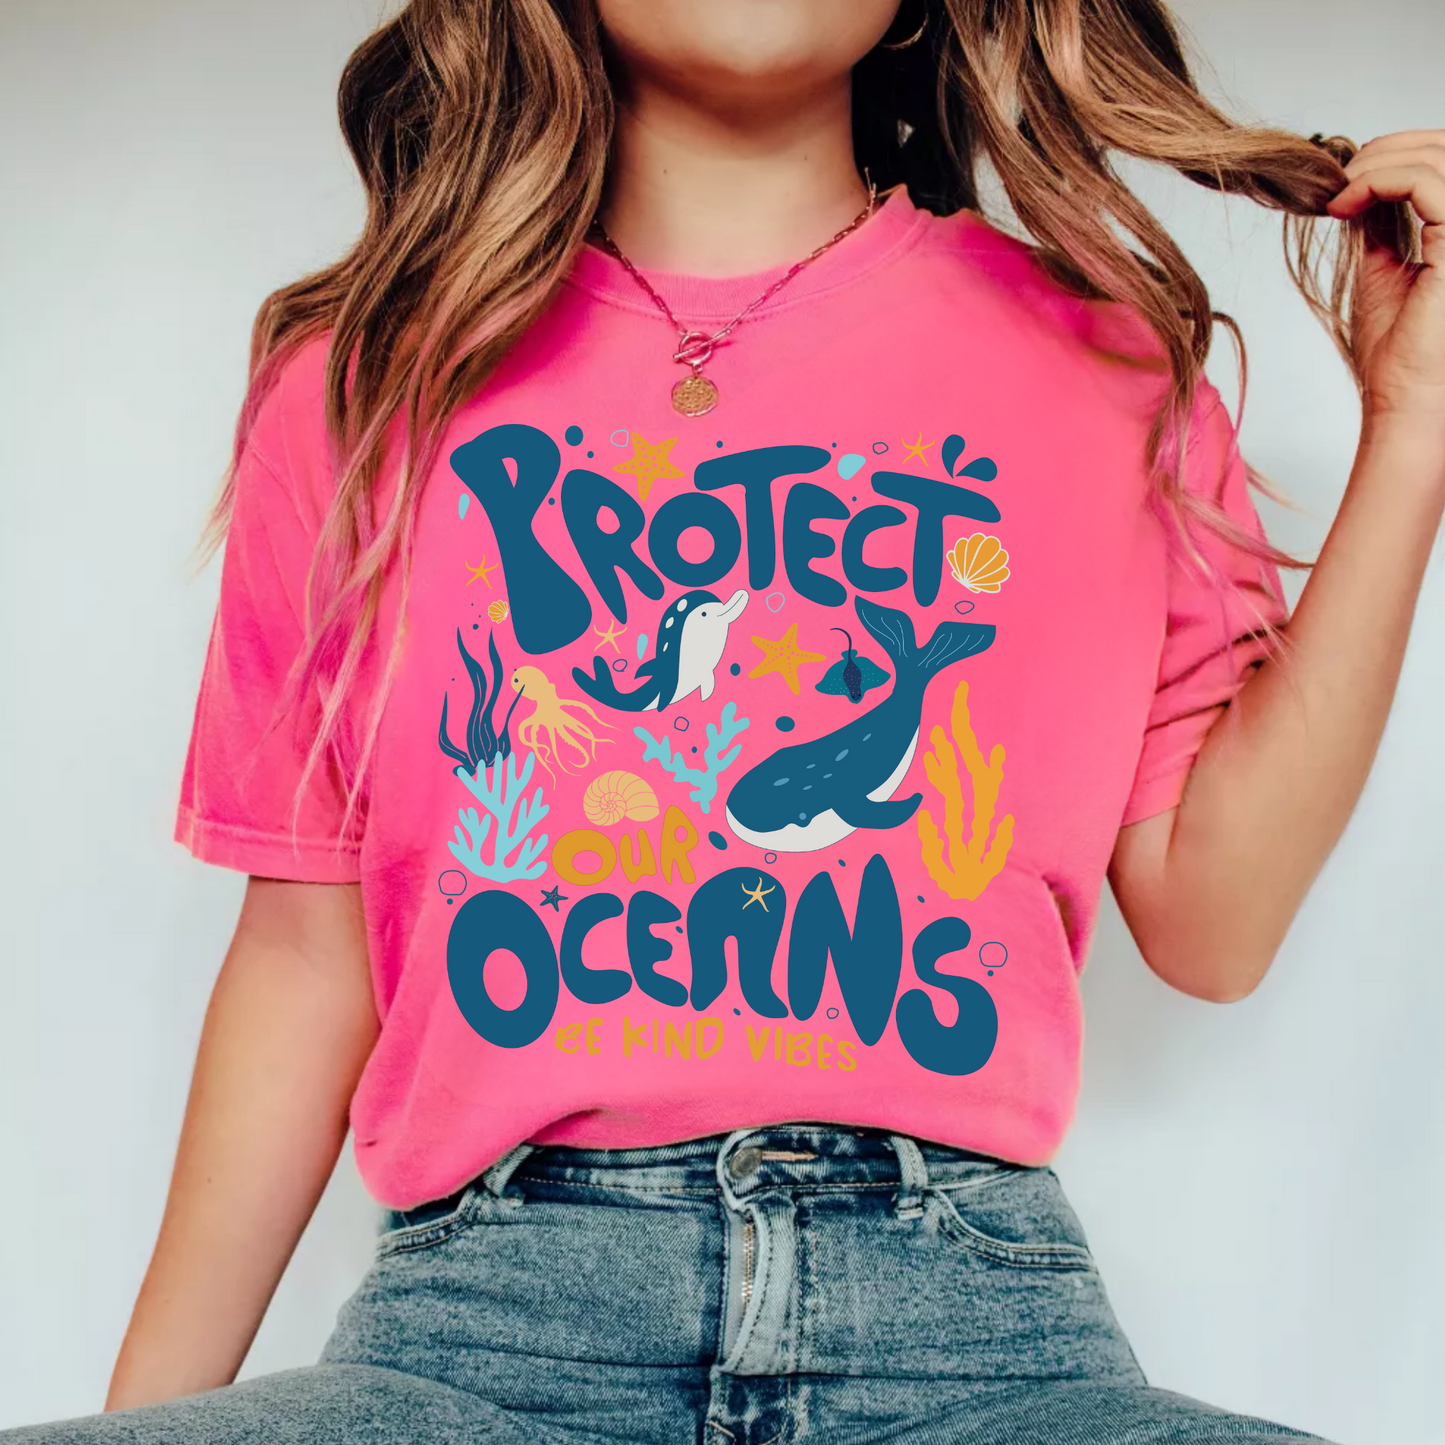 (shirt not included) Protect Our Oceans- Clear Film Transfer